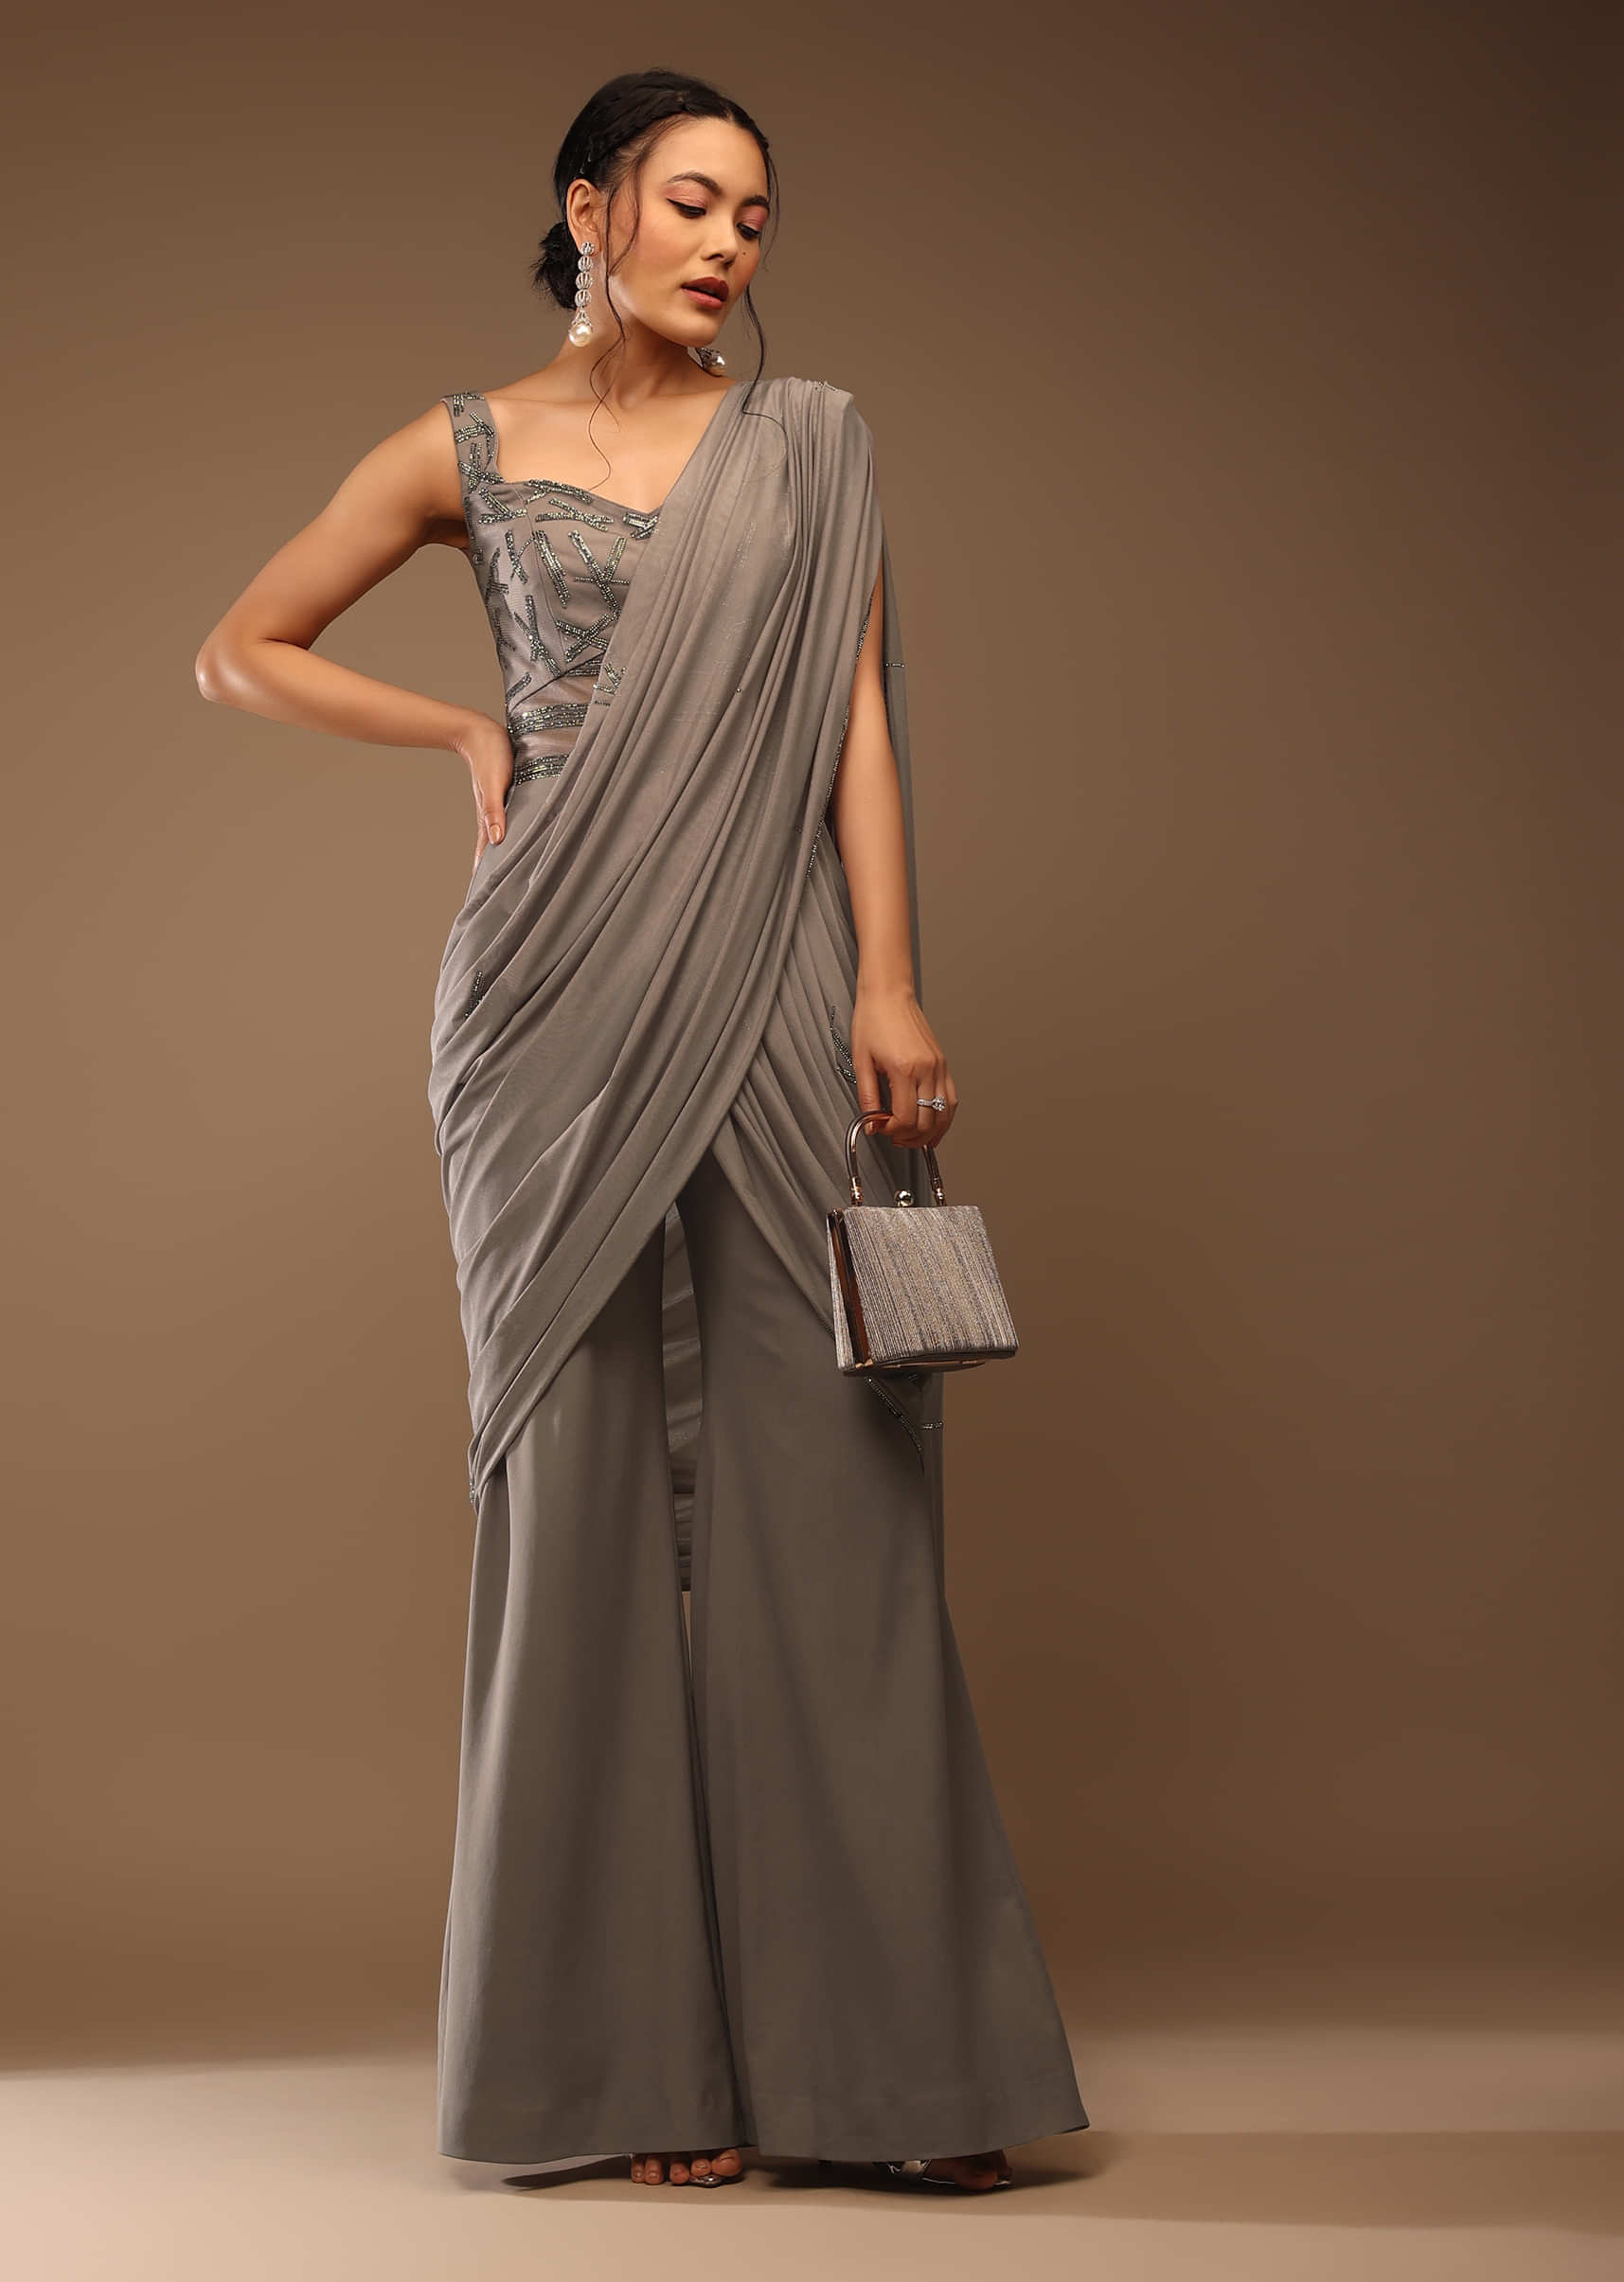 Opal Grey Ready-Pleated Saree Palazzo In Portrait Neckline Sleeveless With The Stones Embellishment In Linings Design